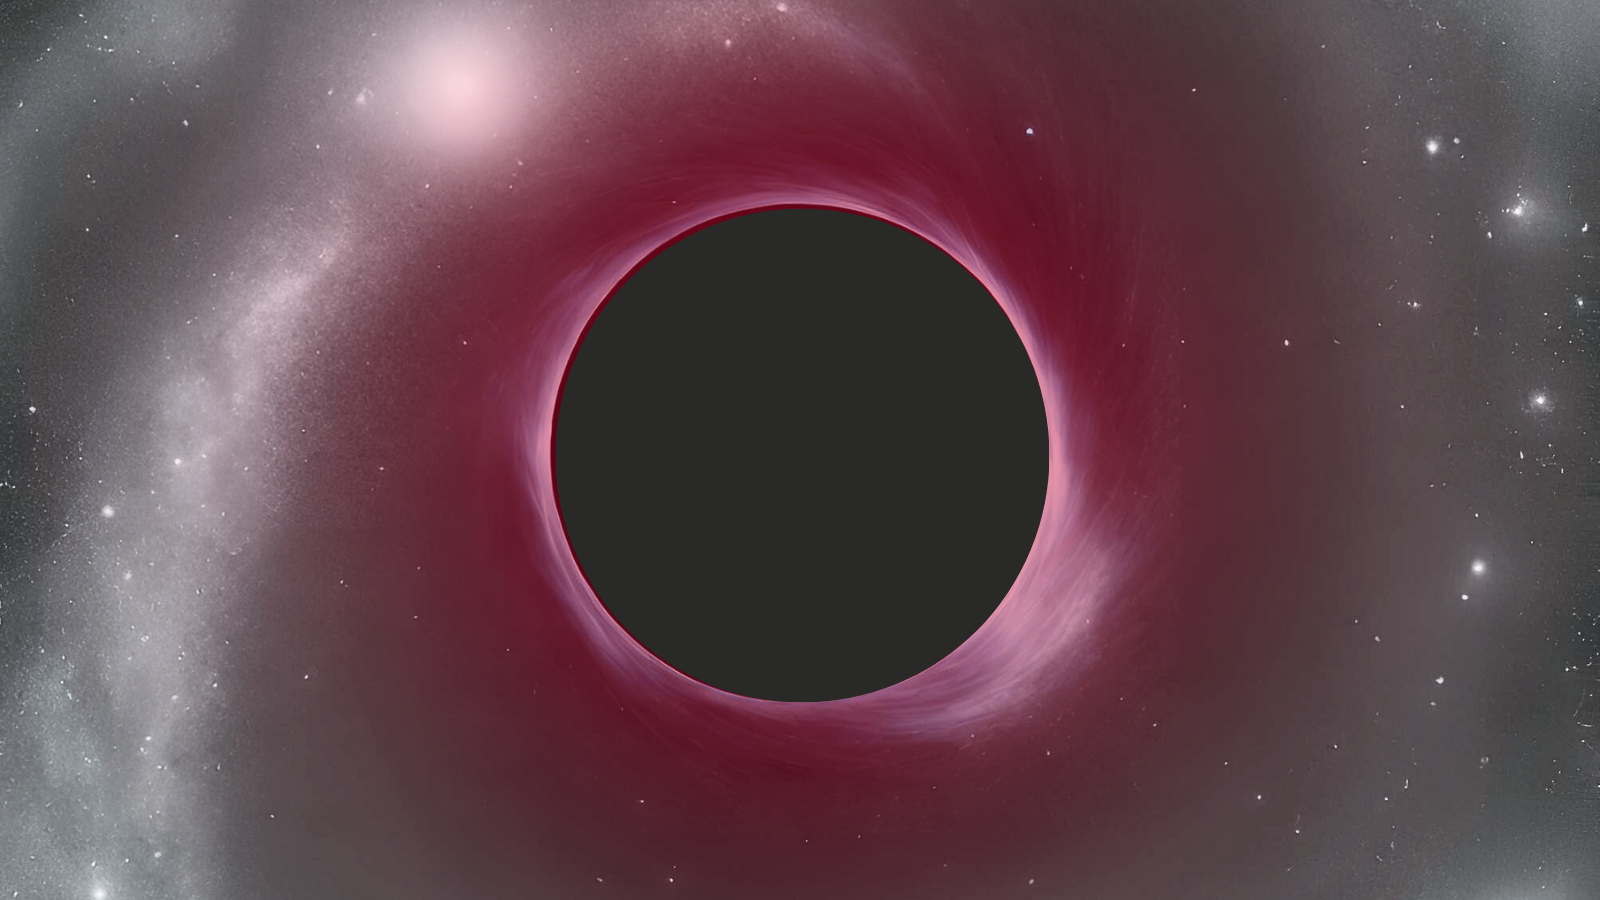 An illustration shows an extreme red supermassive black hole in the early universe